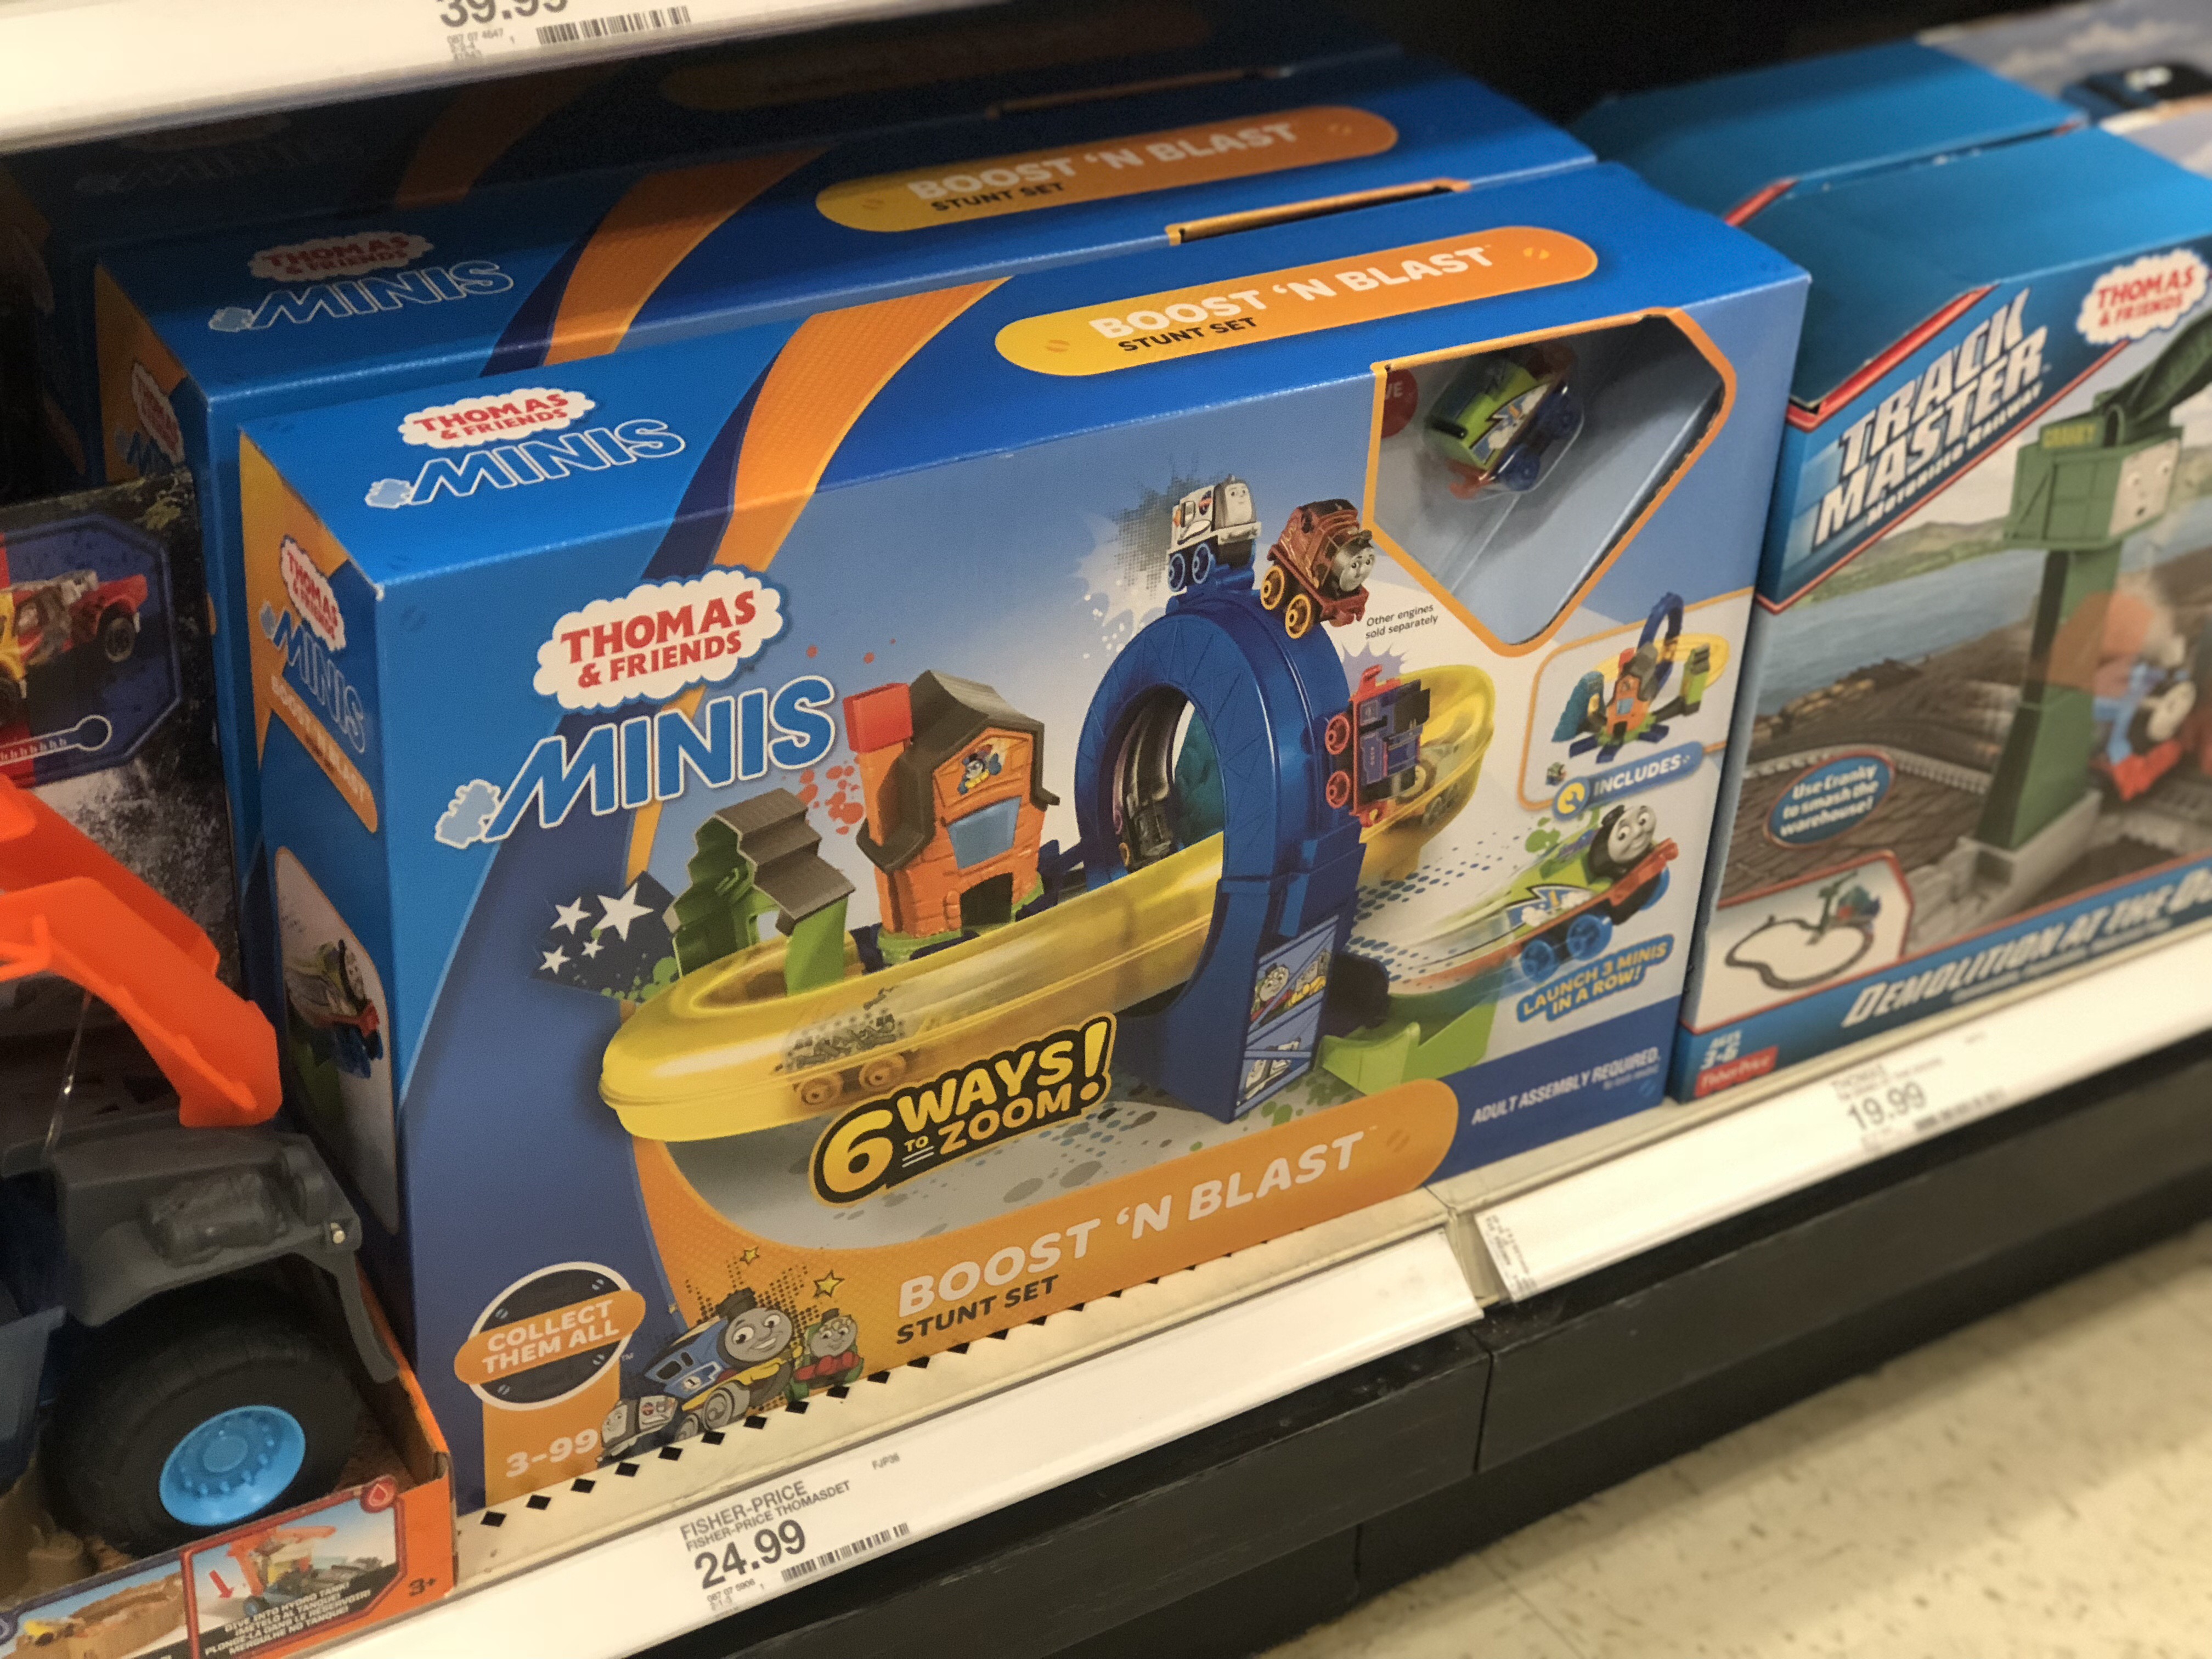 thomas and friends minis target